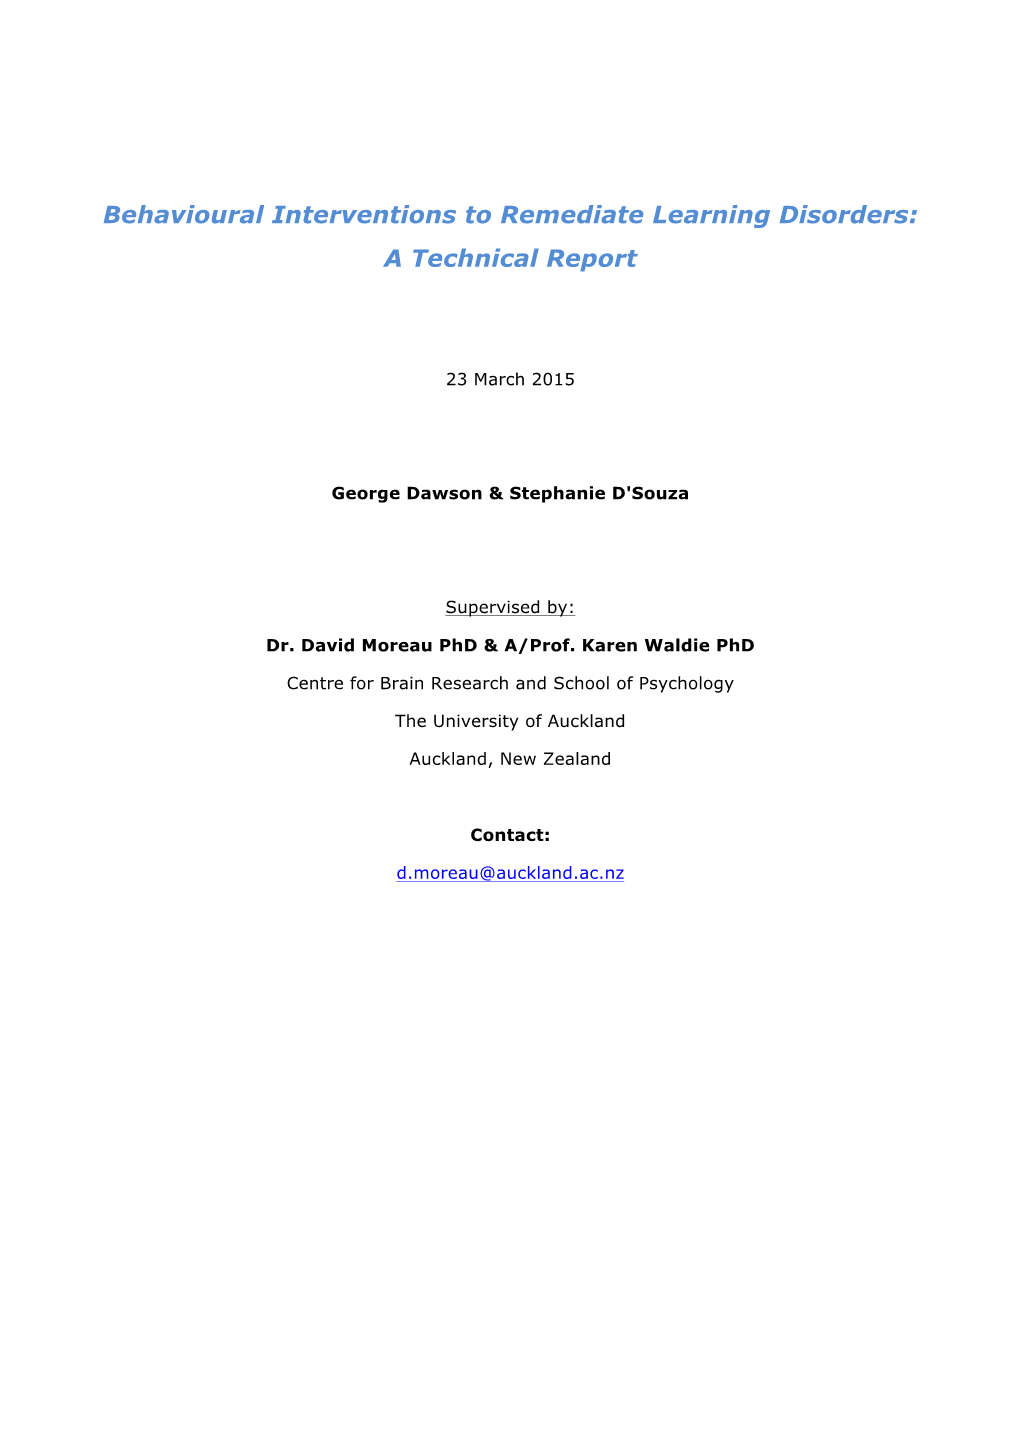 Behavioural Interventions to Remediate Learning Disorders: a Technical Report